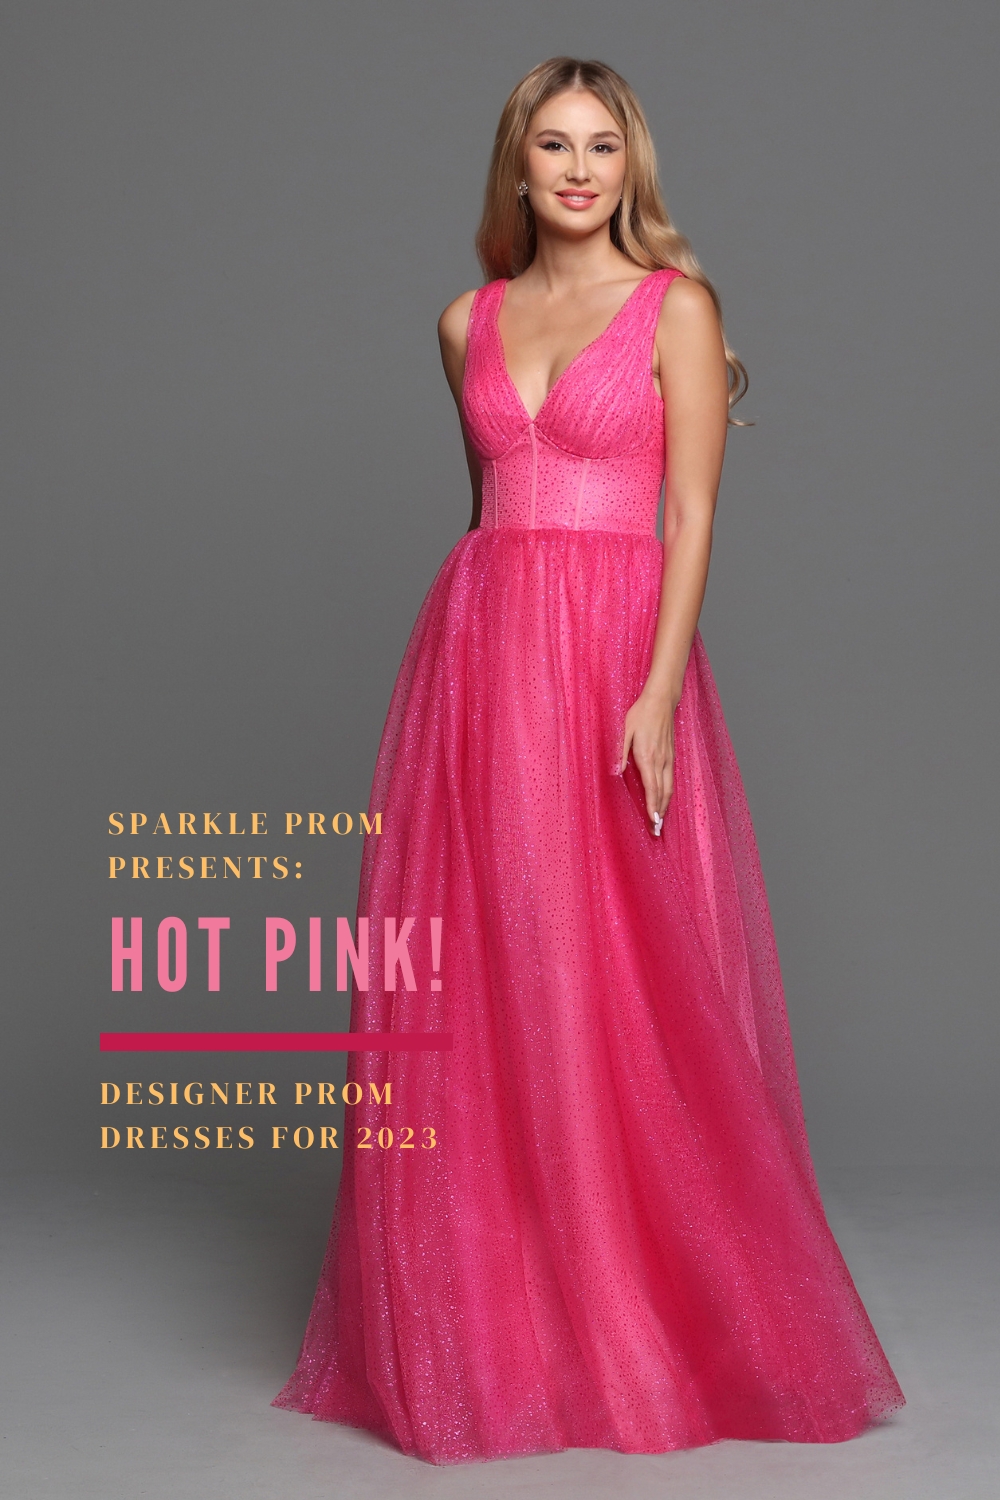 Hot Pink Prom Dresses for 2023